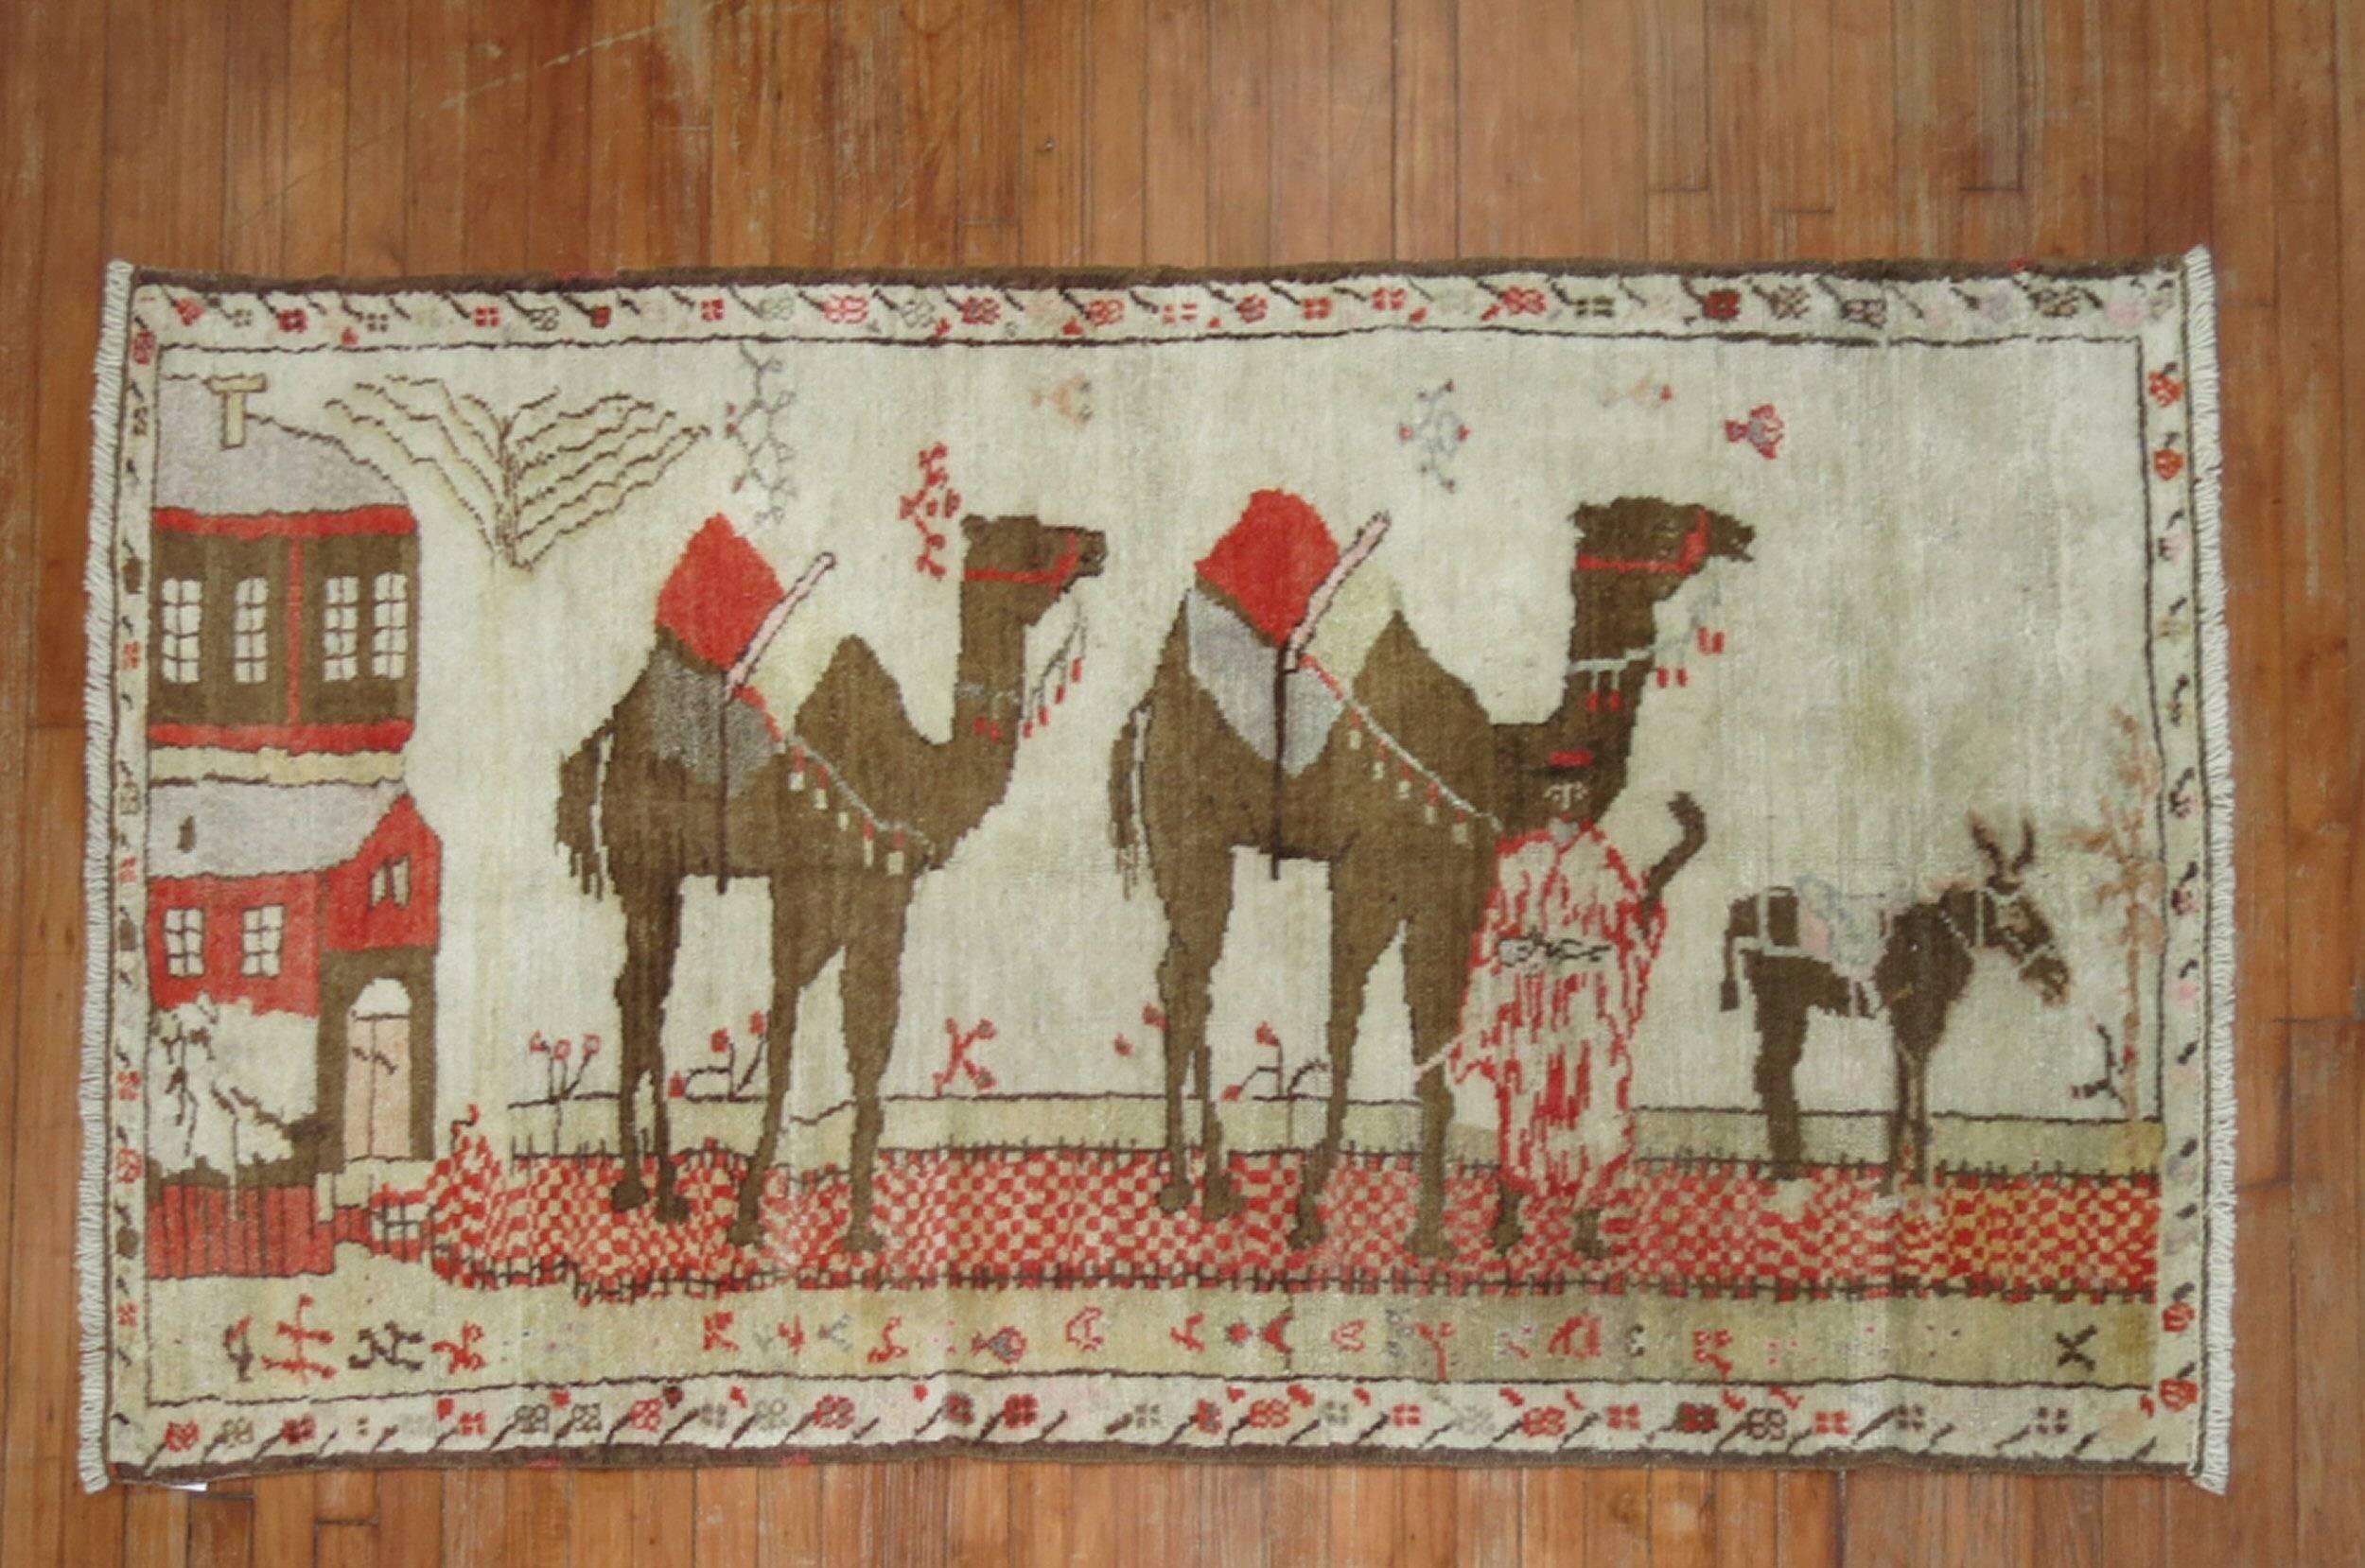 Vintage Turkish pictorial rug woven in central turkey depicting two large camels and a small horse.

3'6'' x 6'4''